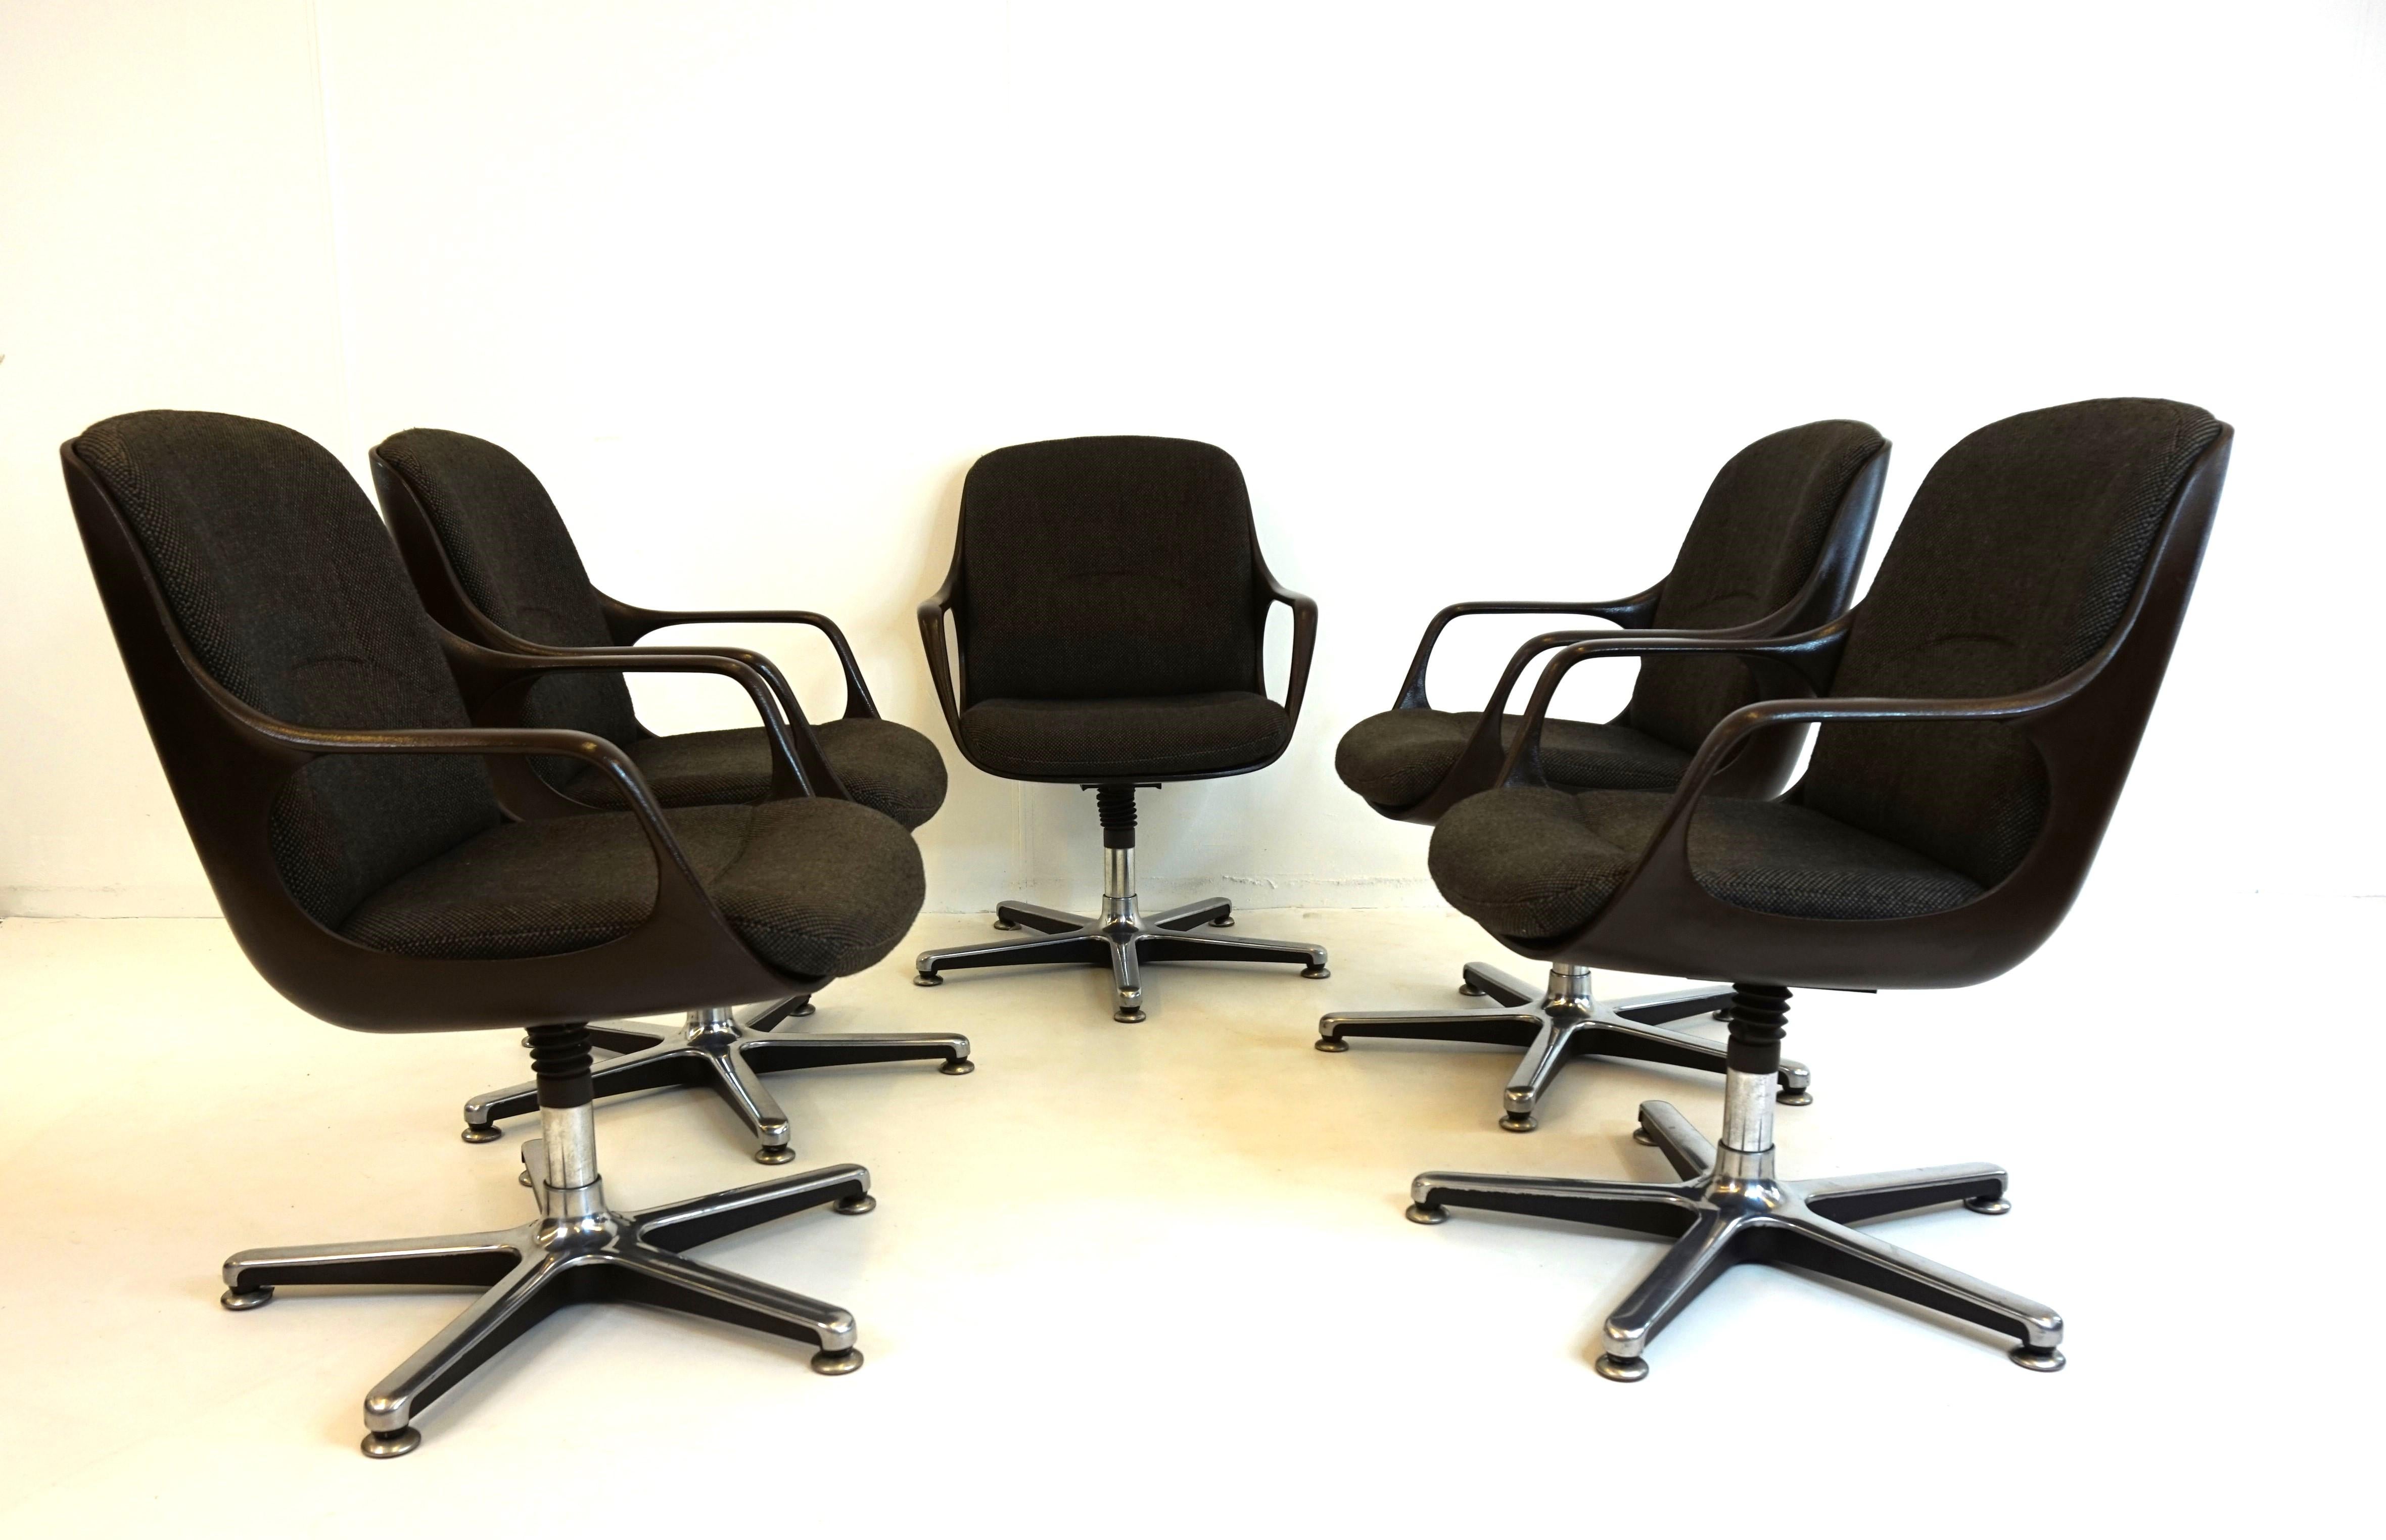 Fabric Chromcraft Set of 5 Space Age Office/Dining Room Chairs